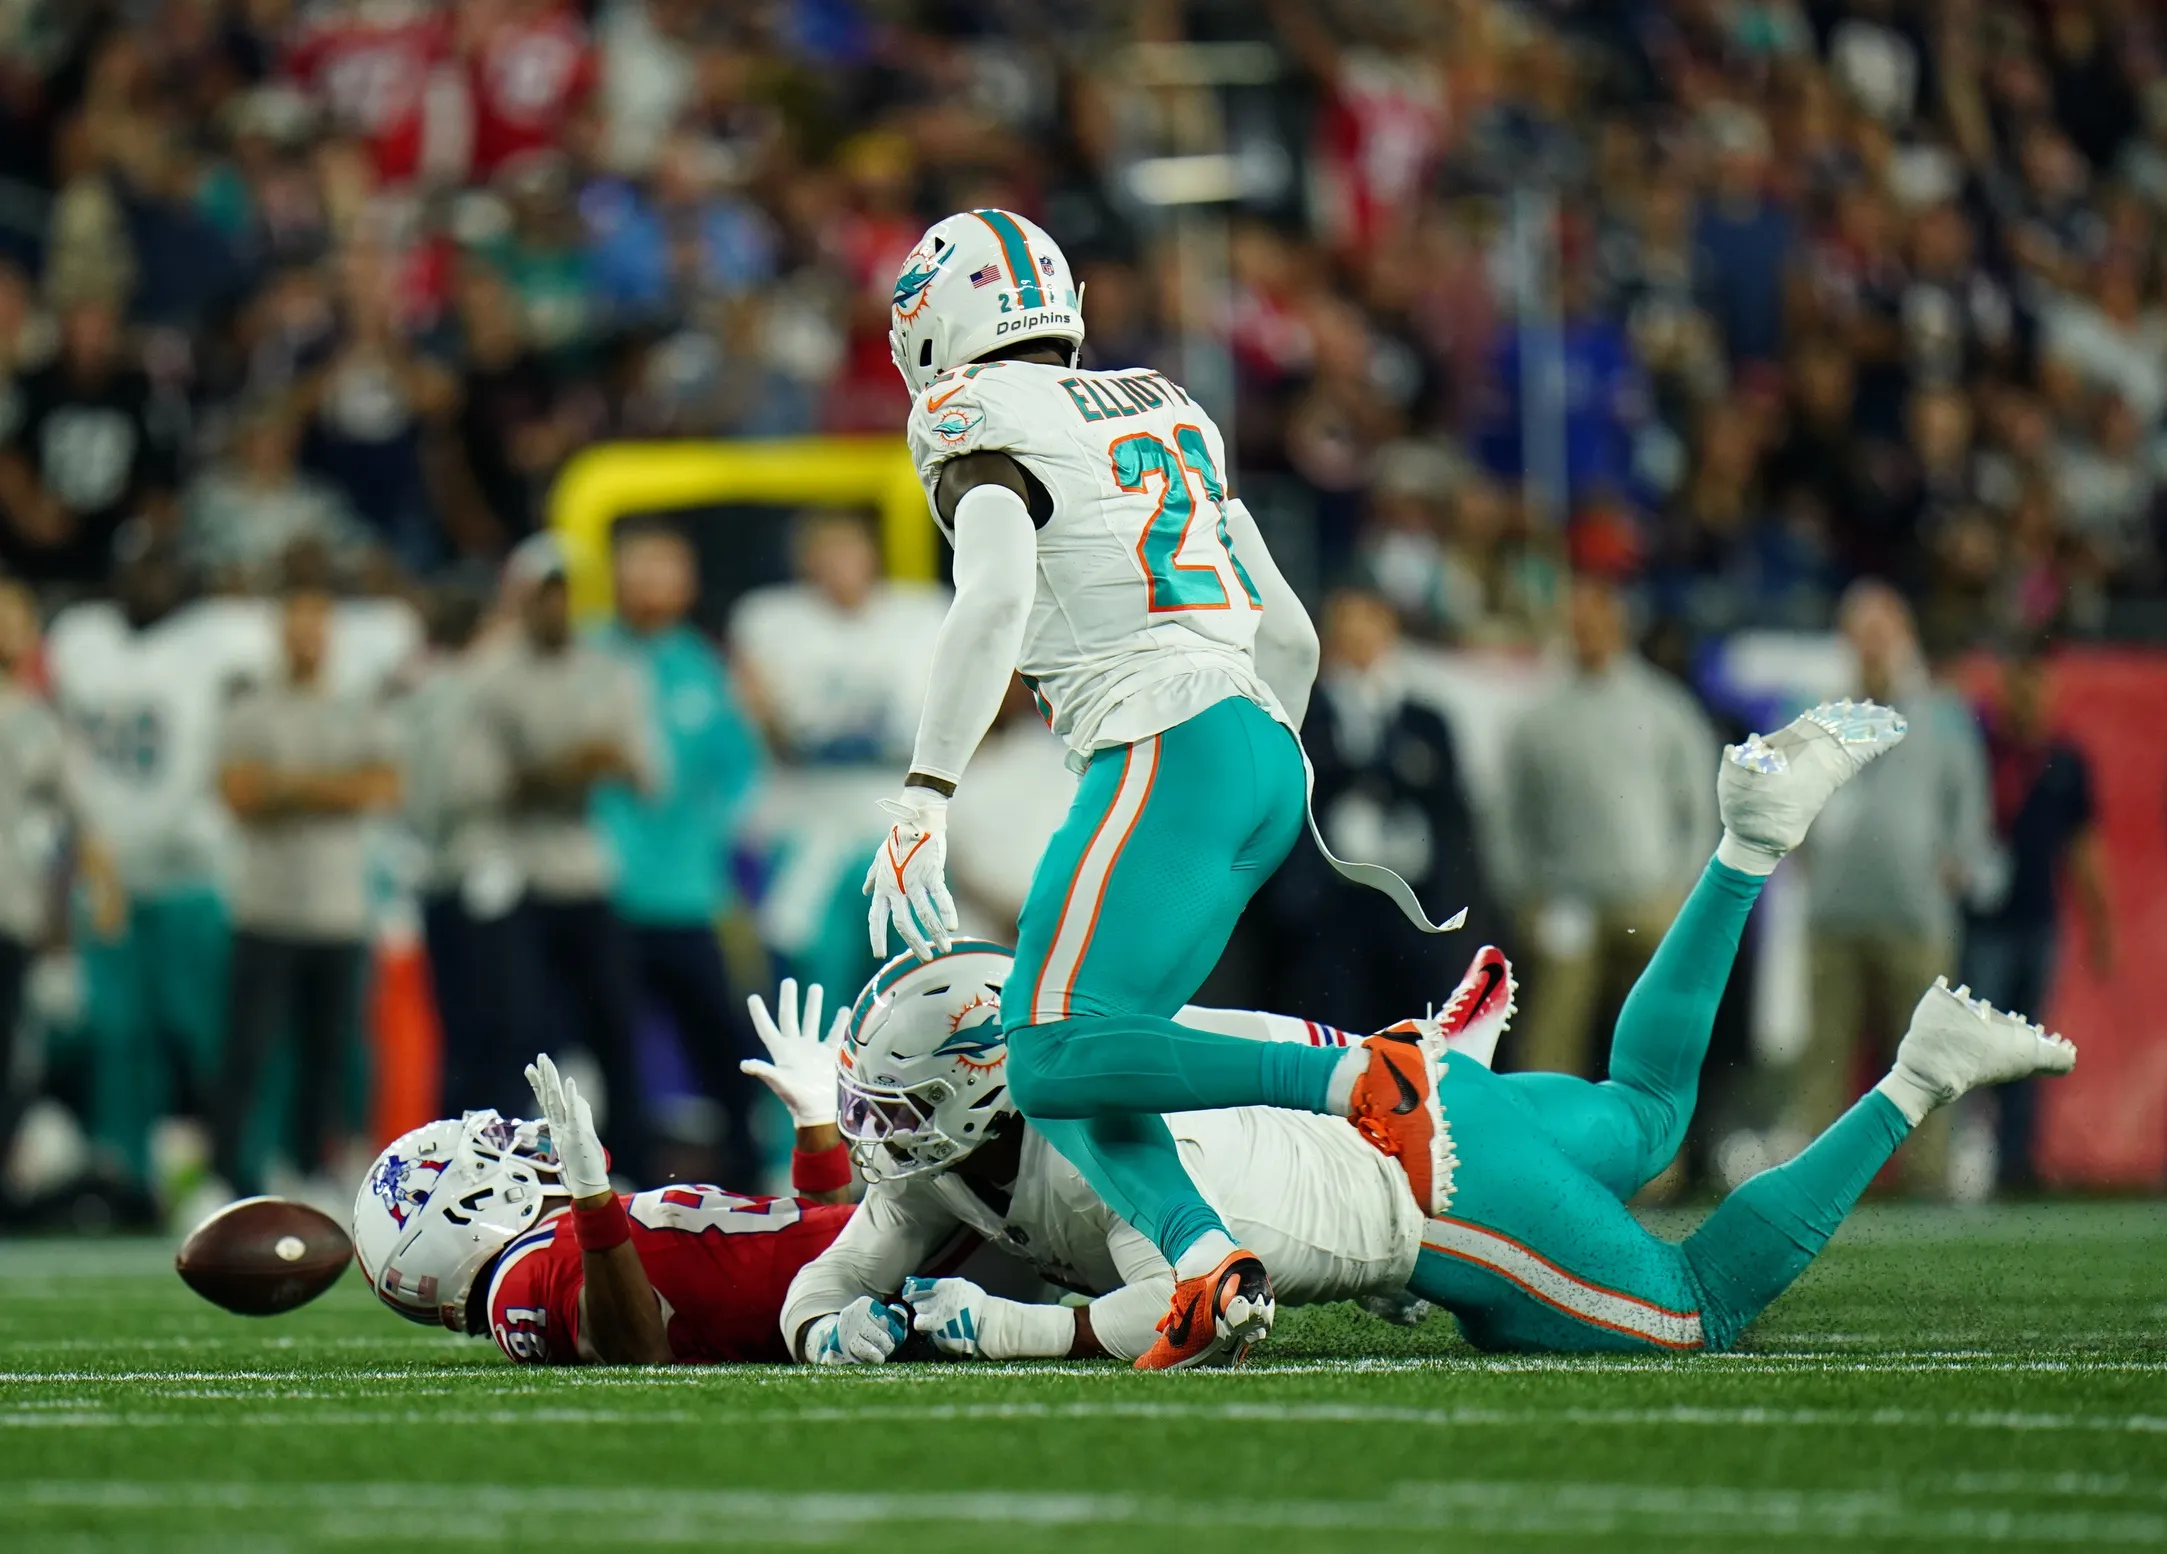 Dolphins linebacker Bradley Chubb on how the Dolphins stepped up